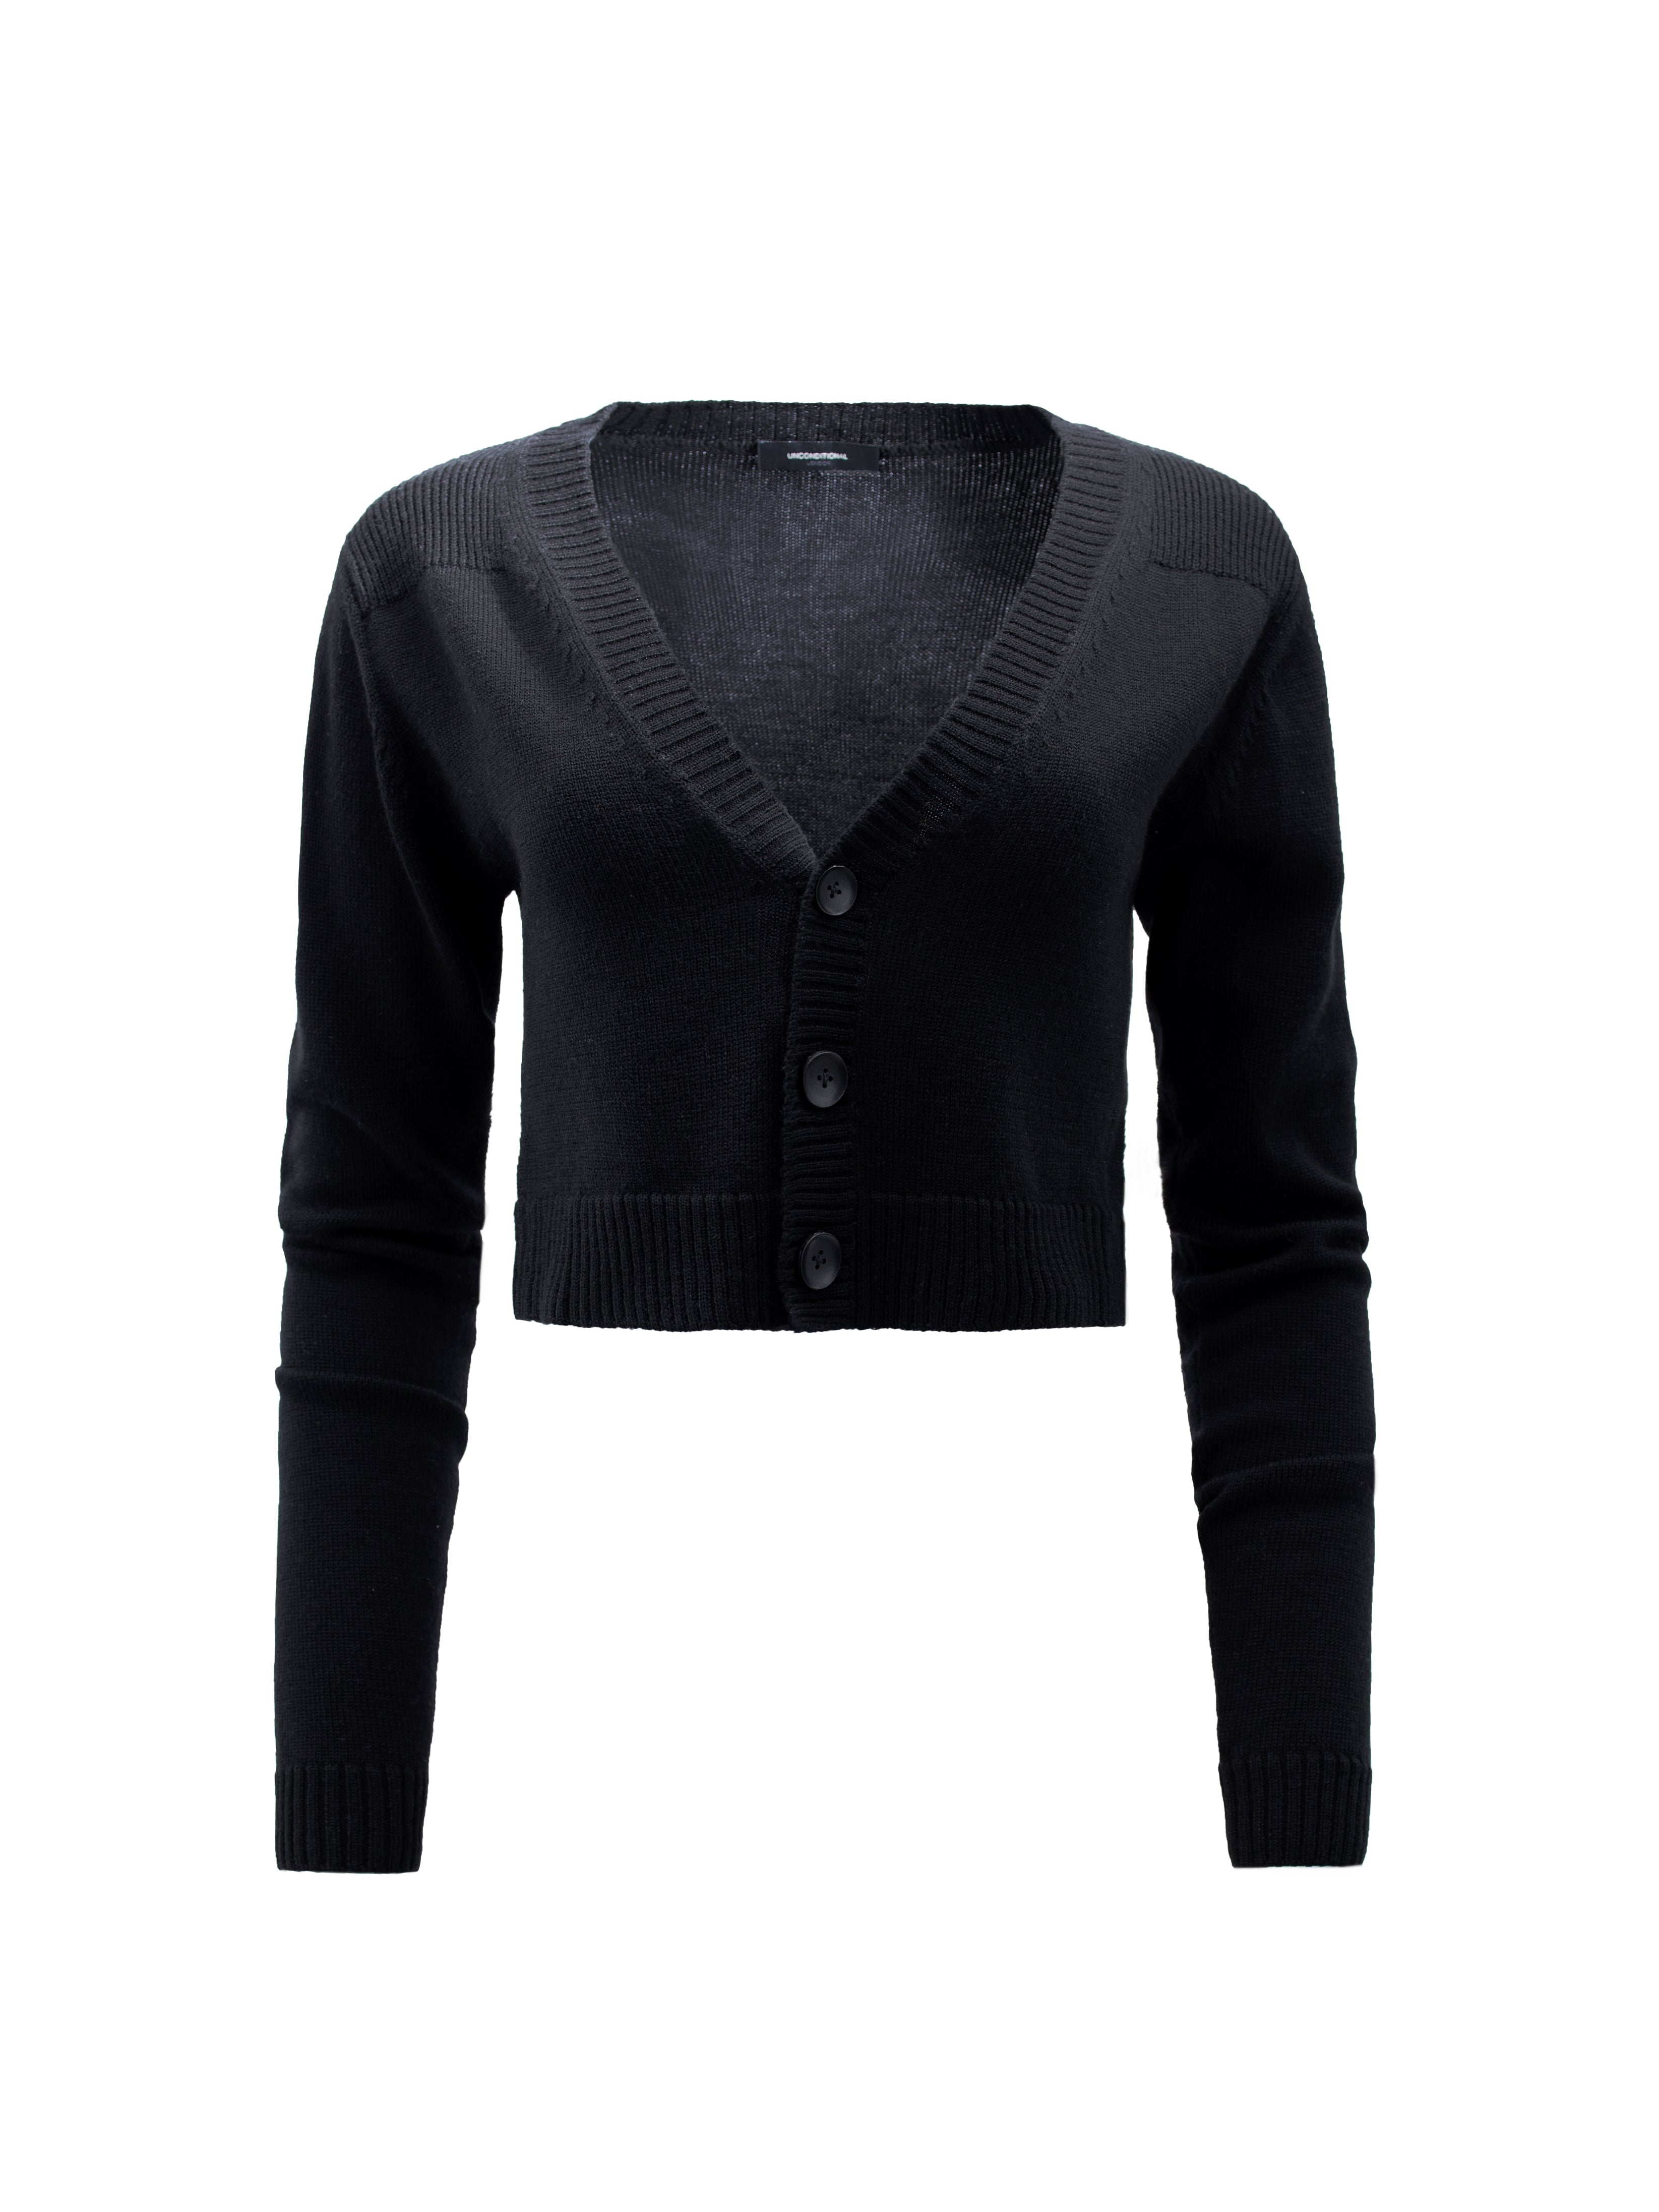 BLACK CROPPED BUTTON UP  WOOL CARDIGAN